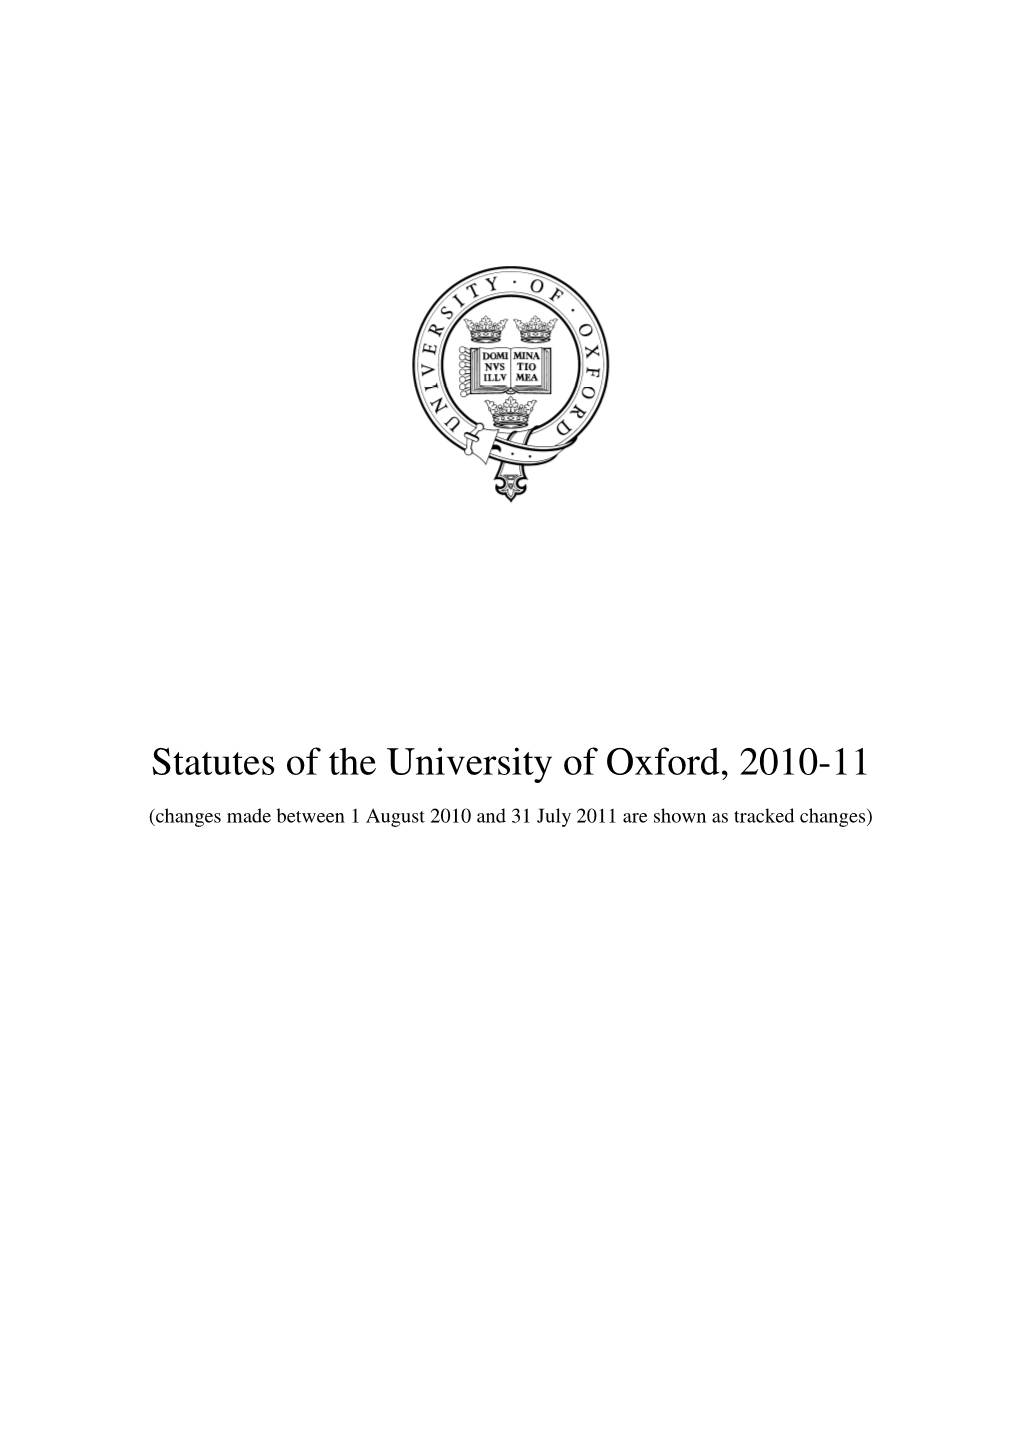 Statutes of the University of Oxford, 2010-11